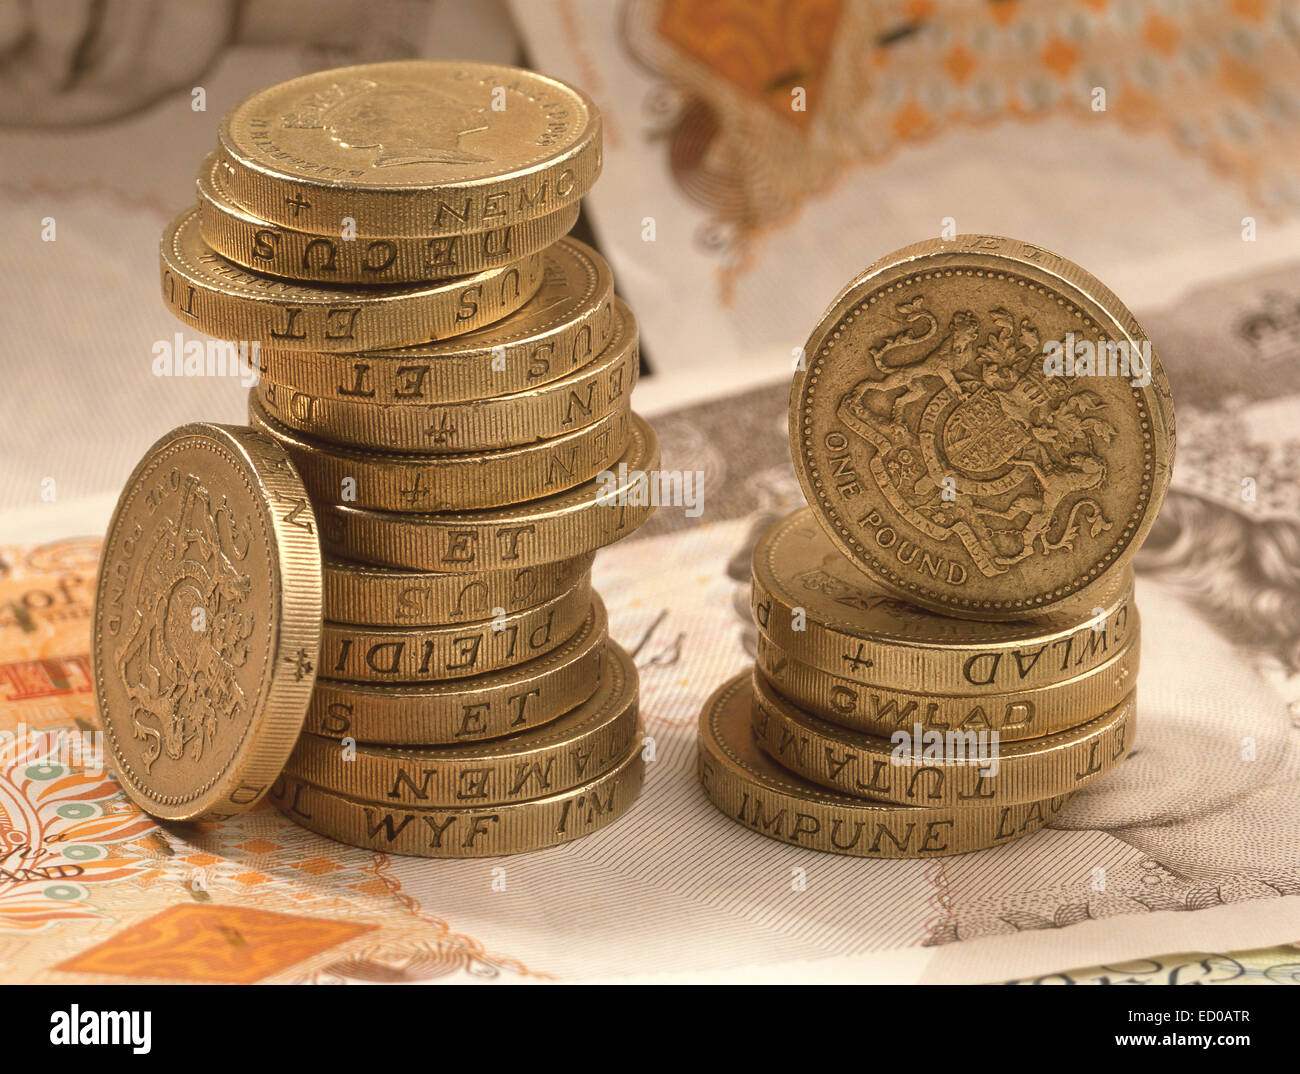 Pile of British one pound coins with background of £10 English banknotes Stock Photo